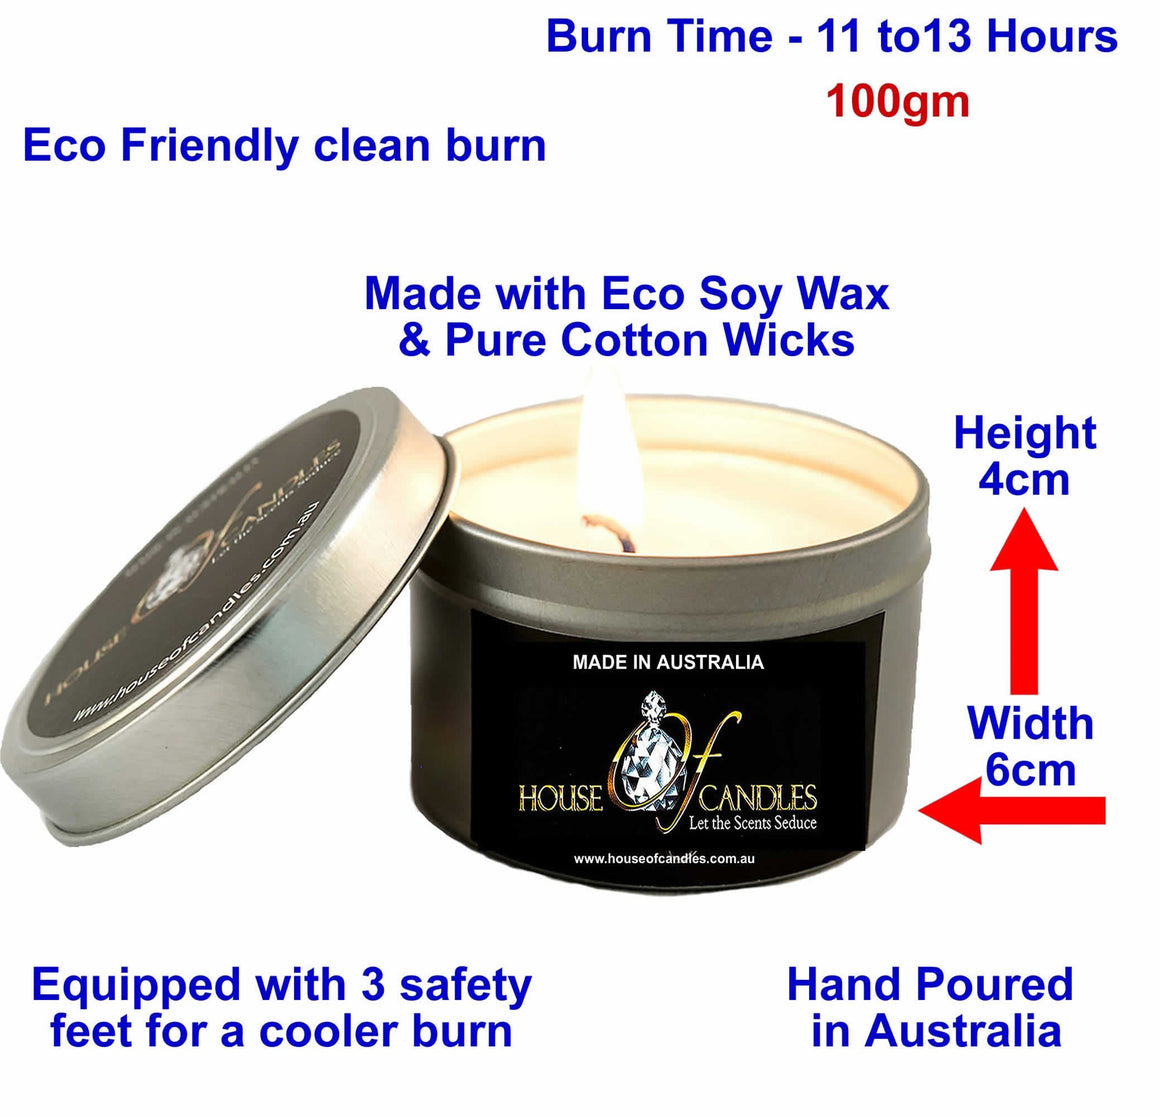 Baby Talc Powder Scented Eco Soy Tin Candles